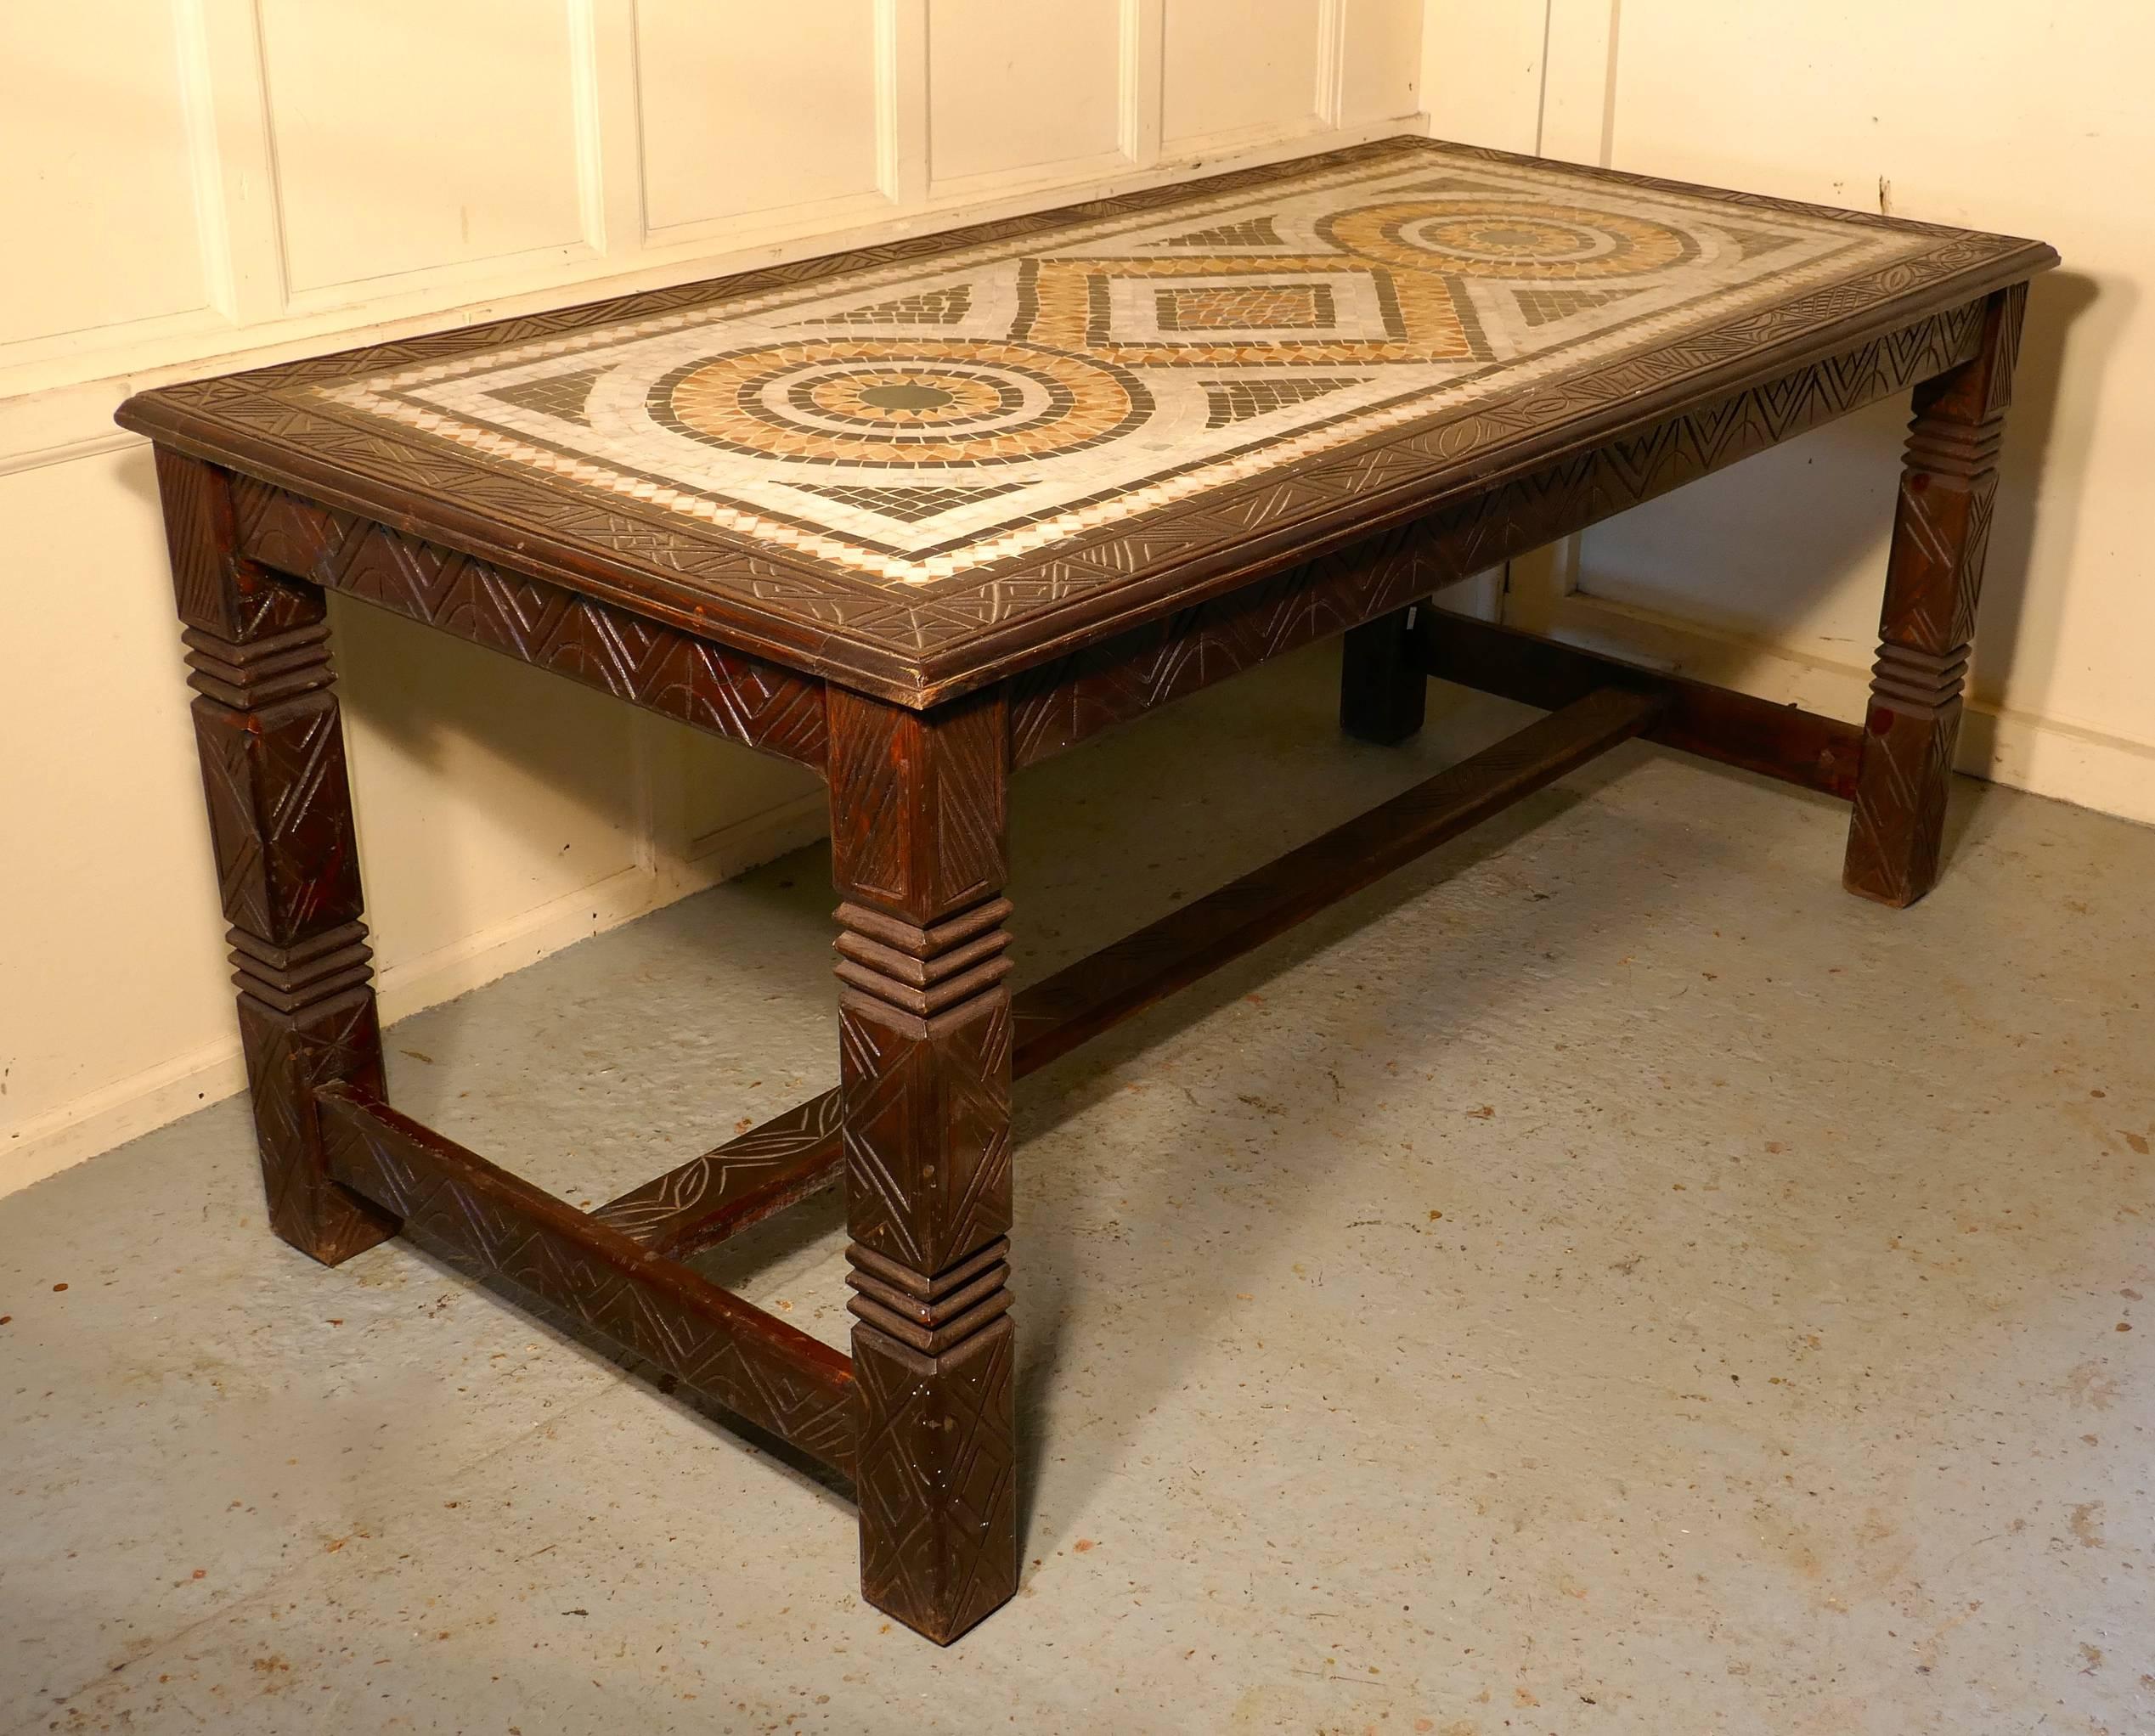 North African marble Mosaic table

A table with a difference, this table is made in solid wood with primitive carved decoration on the legs, stretcher and the border around the tabletop

The centre the 1.5” thick table top is lovely mosaic made